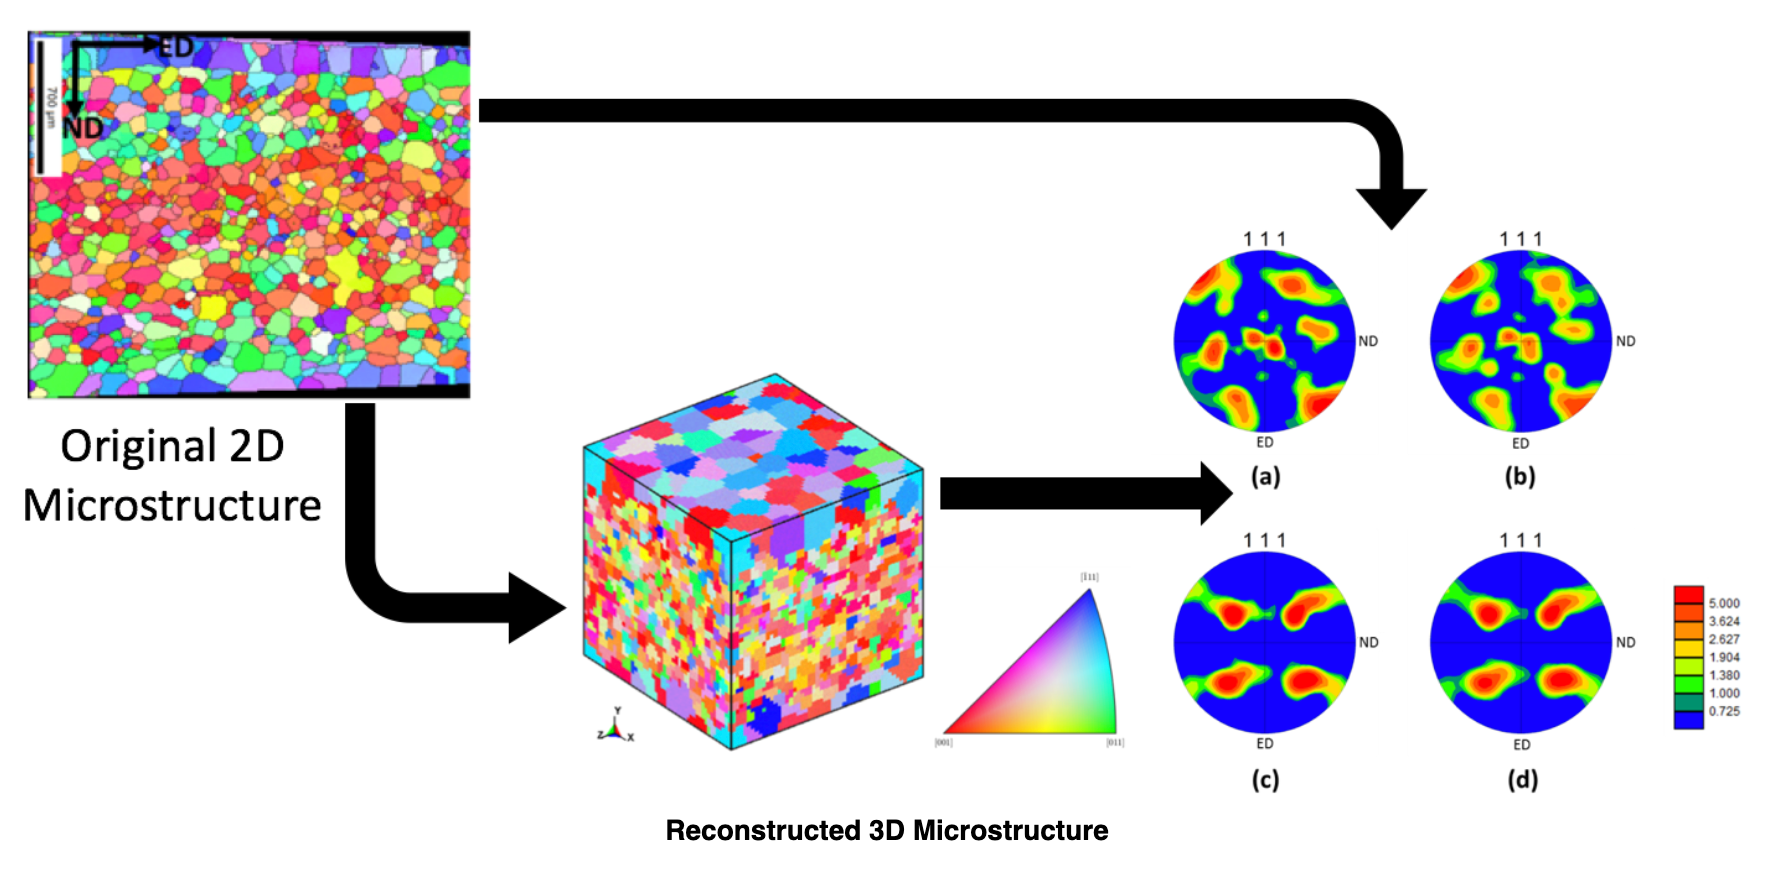 Reconstructed 3D Microstructure